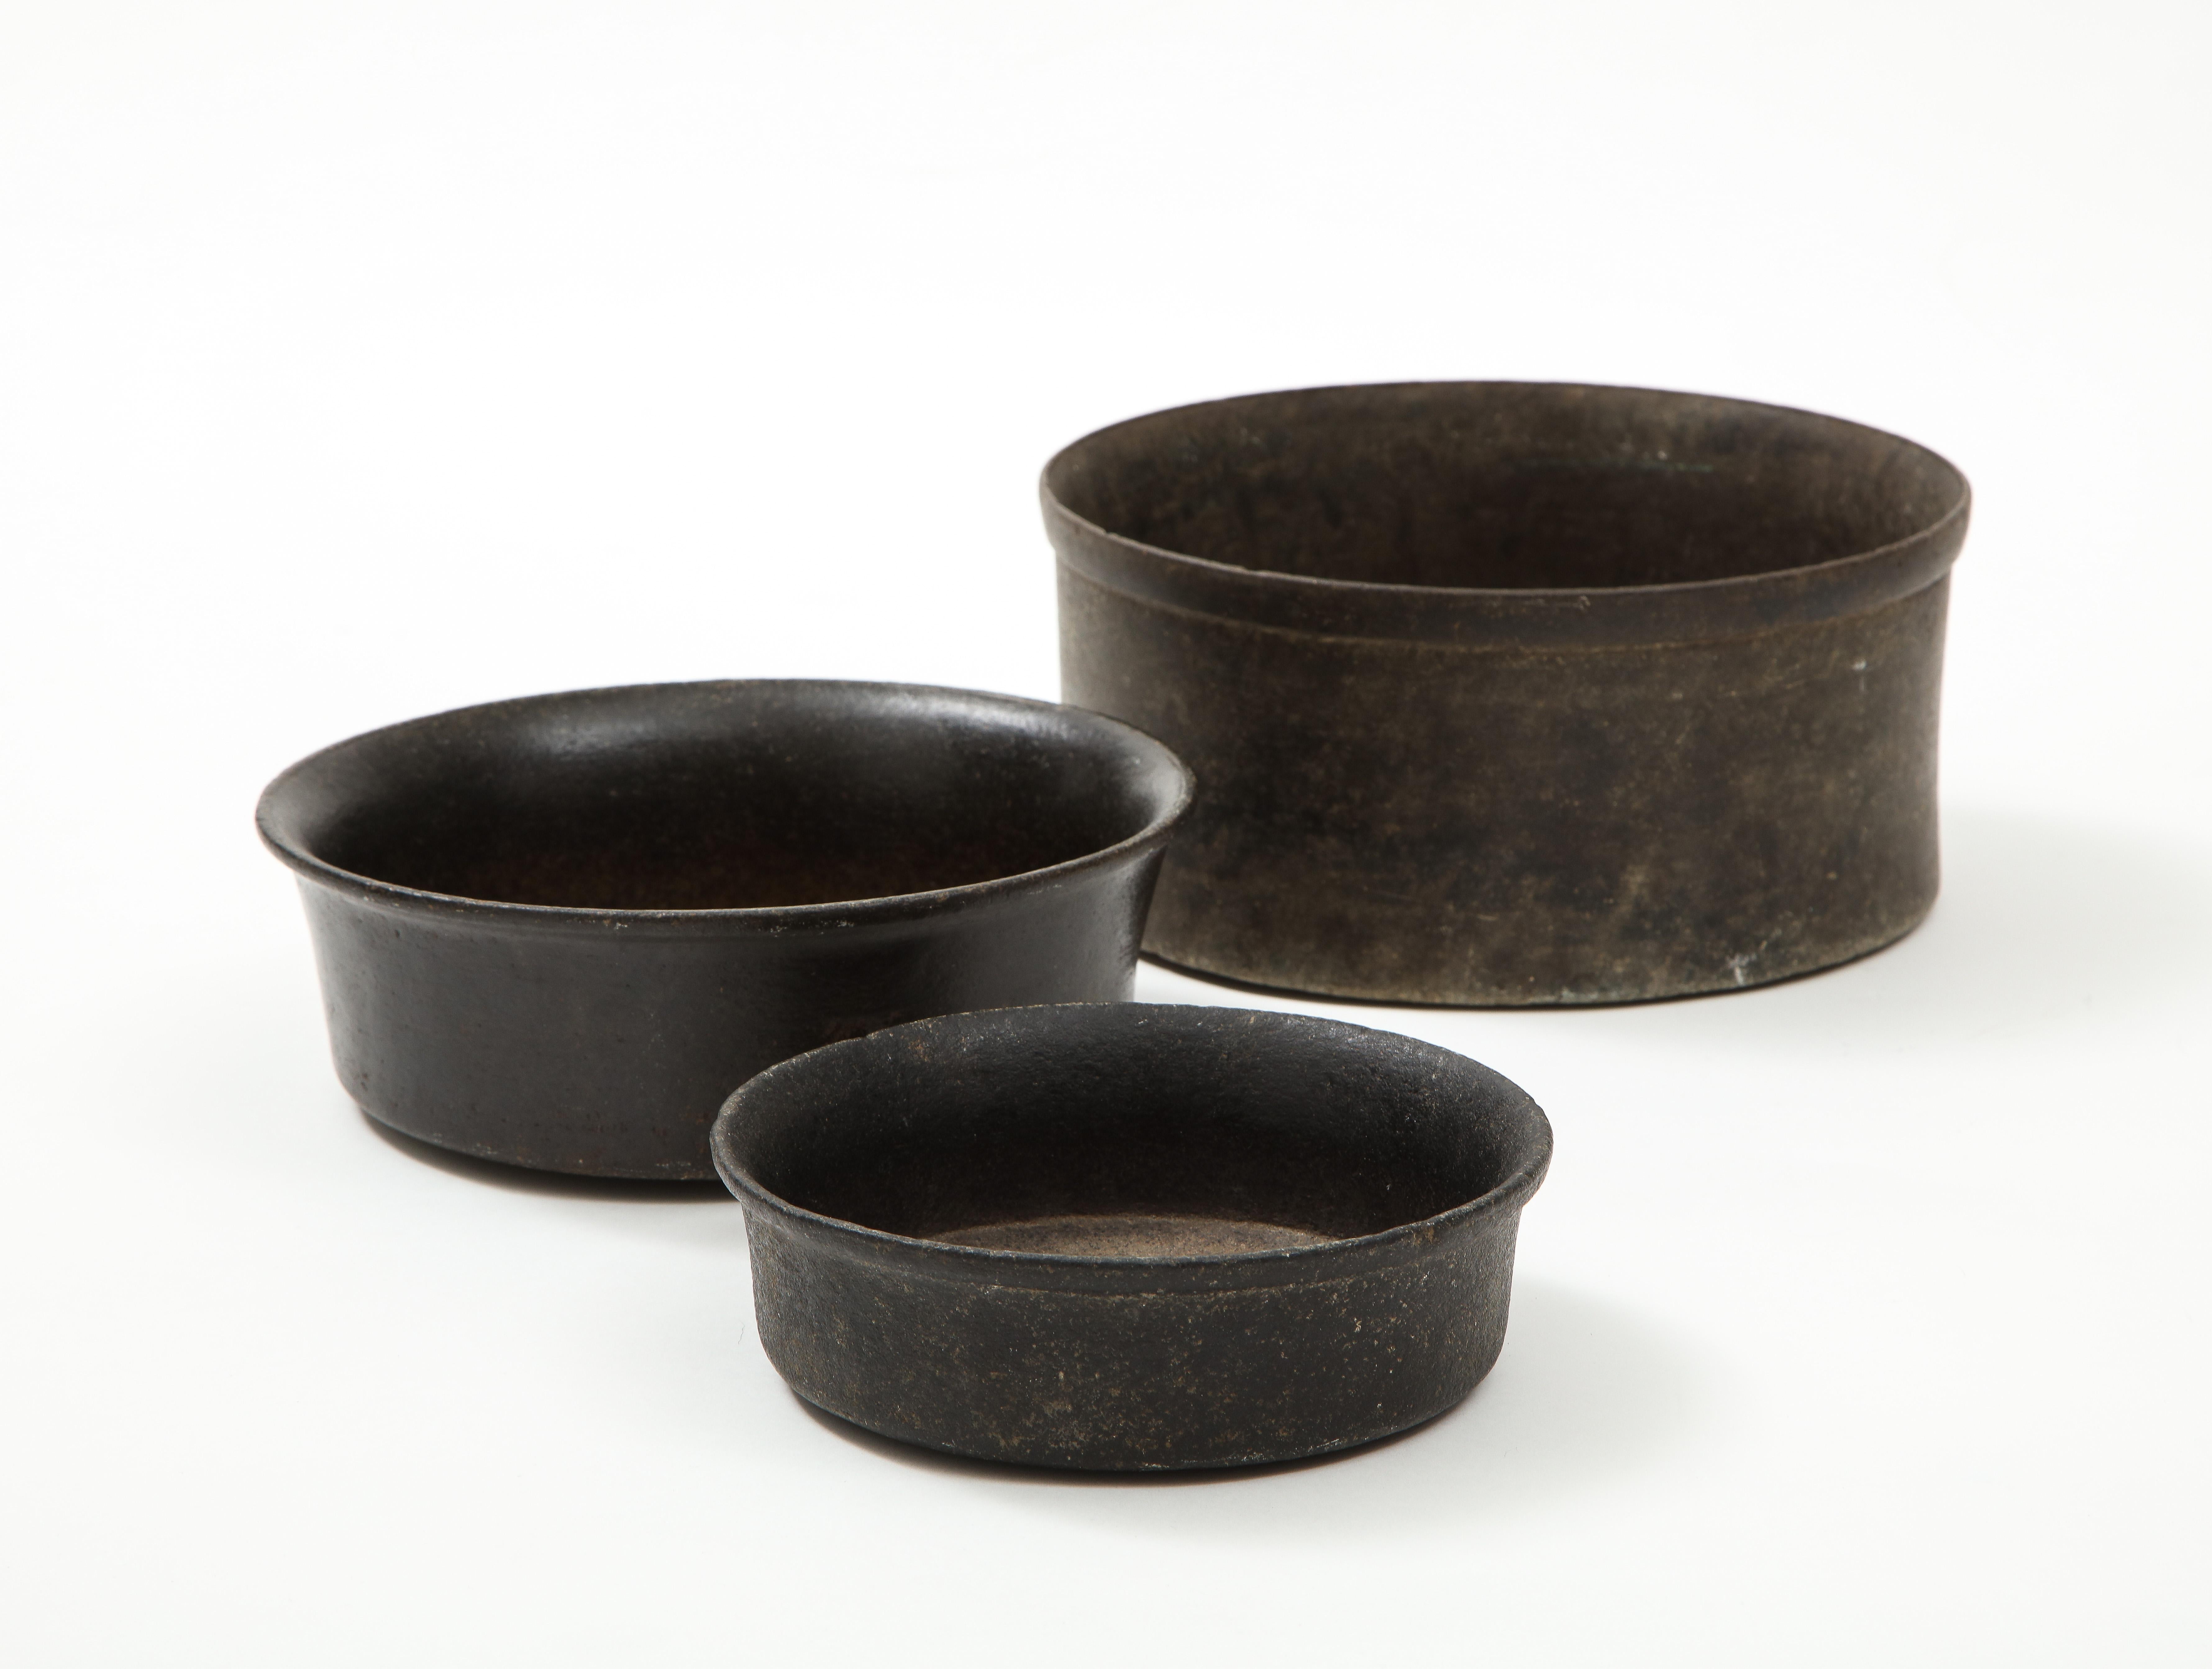 Set of three Mesoamerican bowls, (PreColumbian/Chauvin) 900 B.C. - 1500 A.D.
Stone, hand-carved

Measures: Height 2 diameter 7 in.
Height 3 diameter 9 in.
Height 4.25 diameter 9.5 in.
  